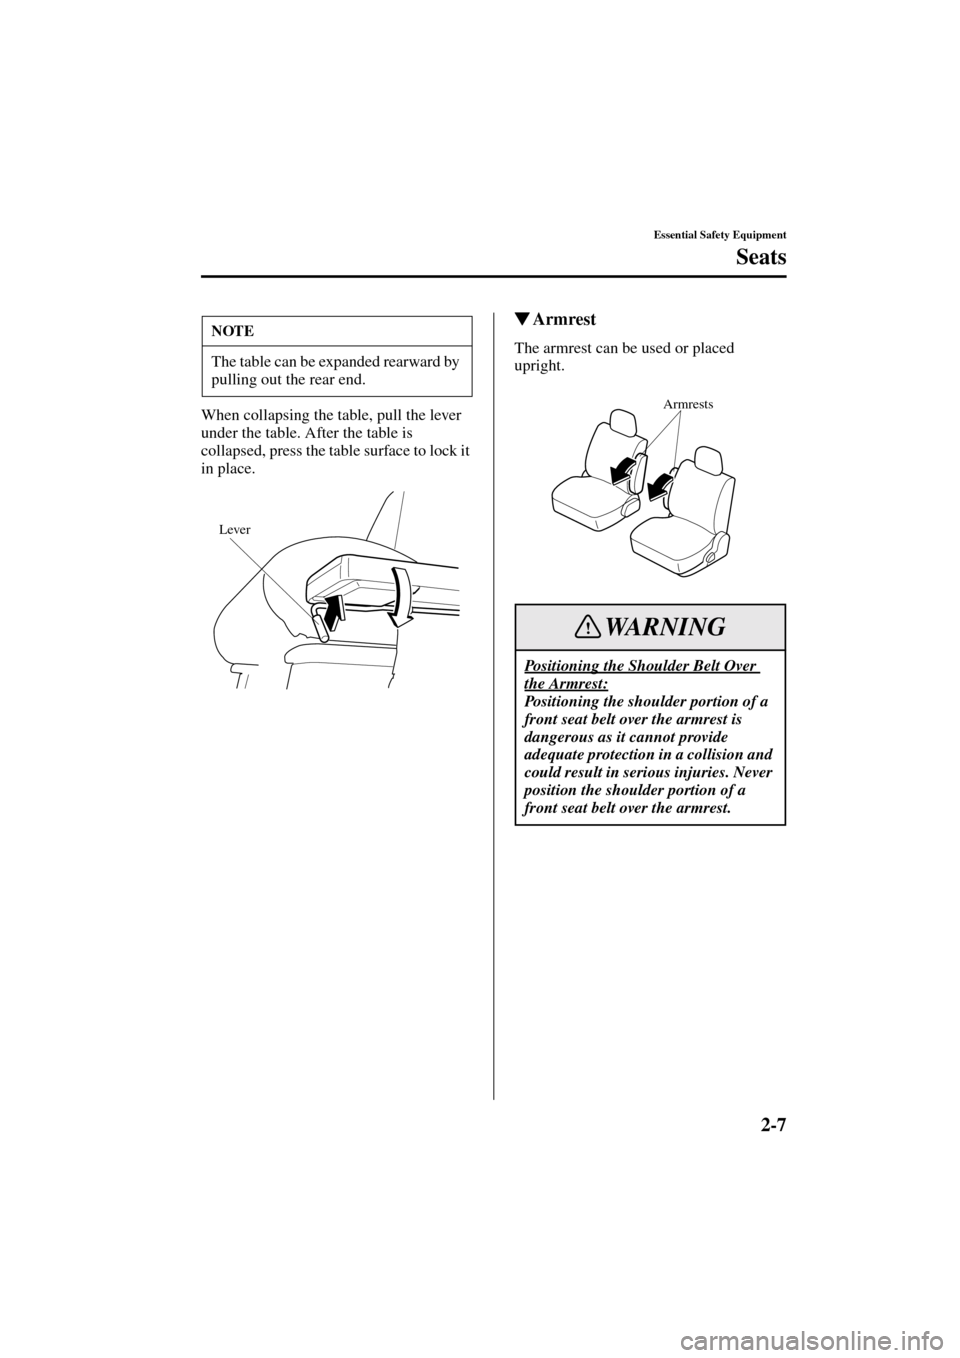 MAZDA MODEL MPV 2004  Owners Manual (in English) 2-7
Essential Safety Equipment
Seats
Form No. 8S06-EA-03H
When collapsing the table, pull the lever 
under the table. After the table is 
collapsed, press the table surface to lock it 
in place.
Armr